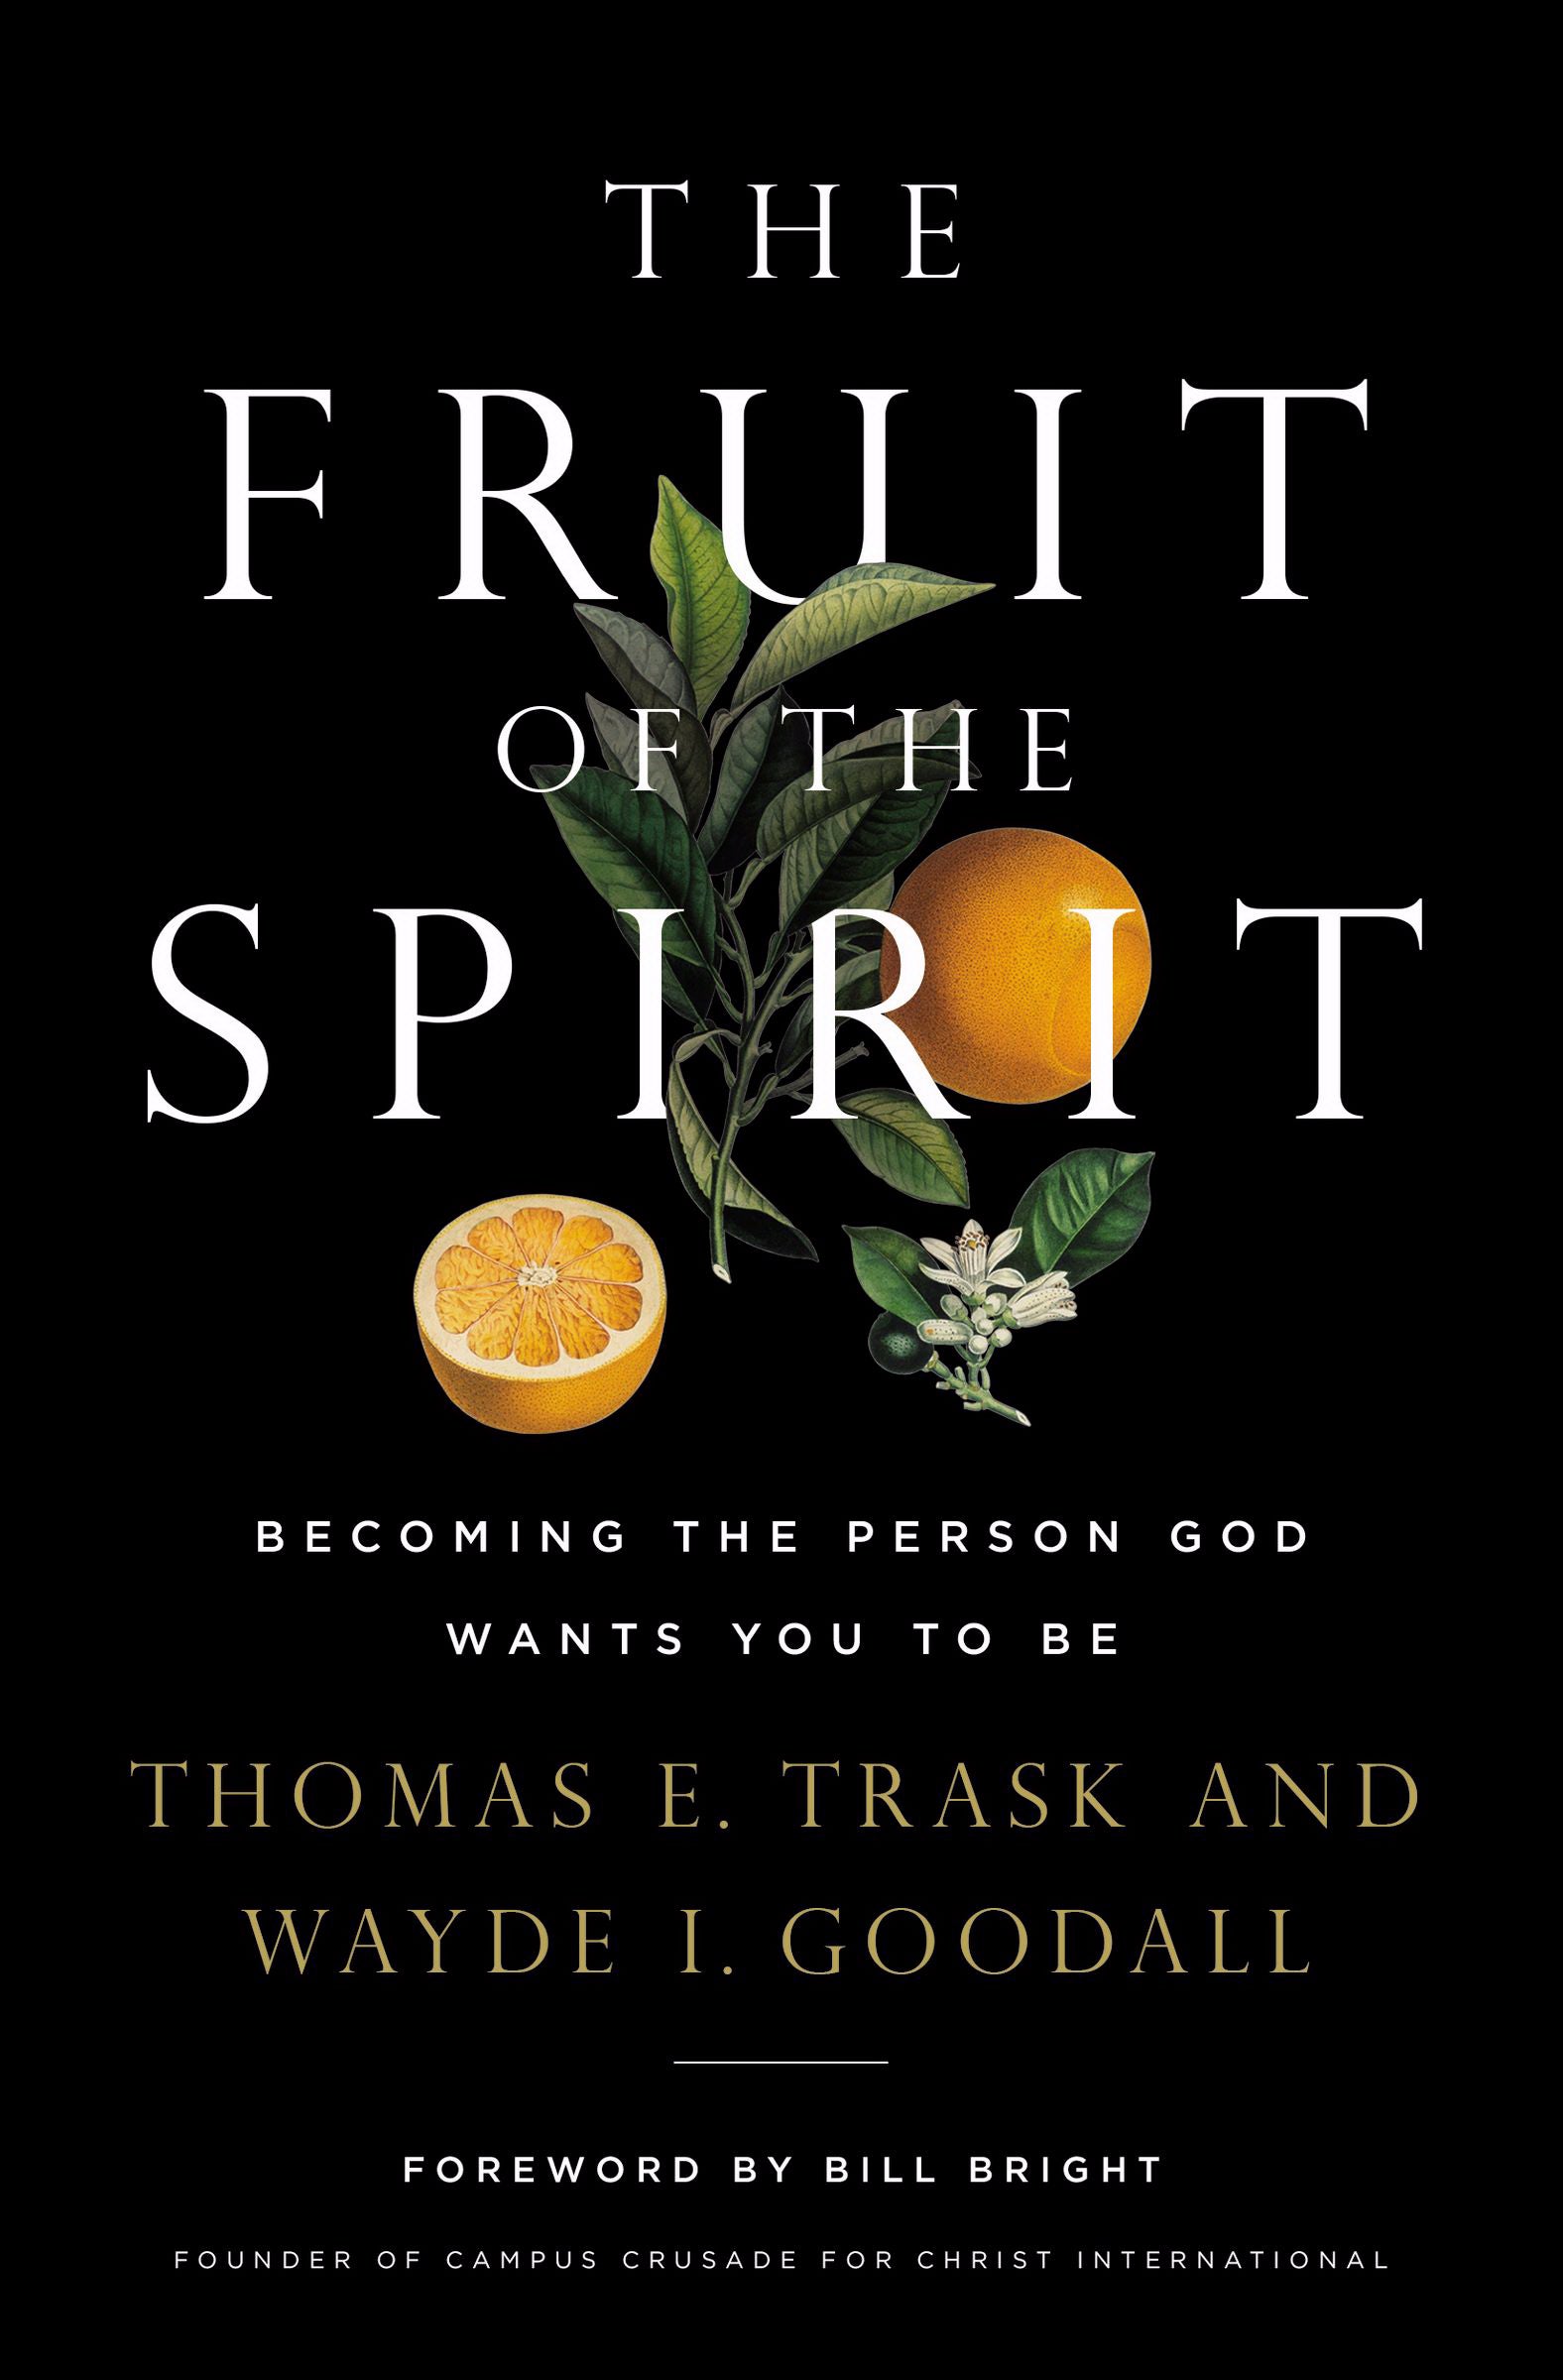 Image of The Fruit of the Spirit other